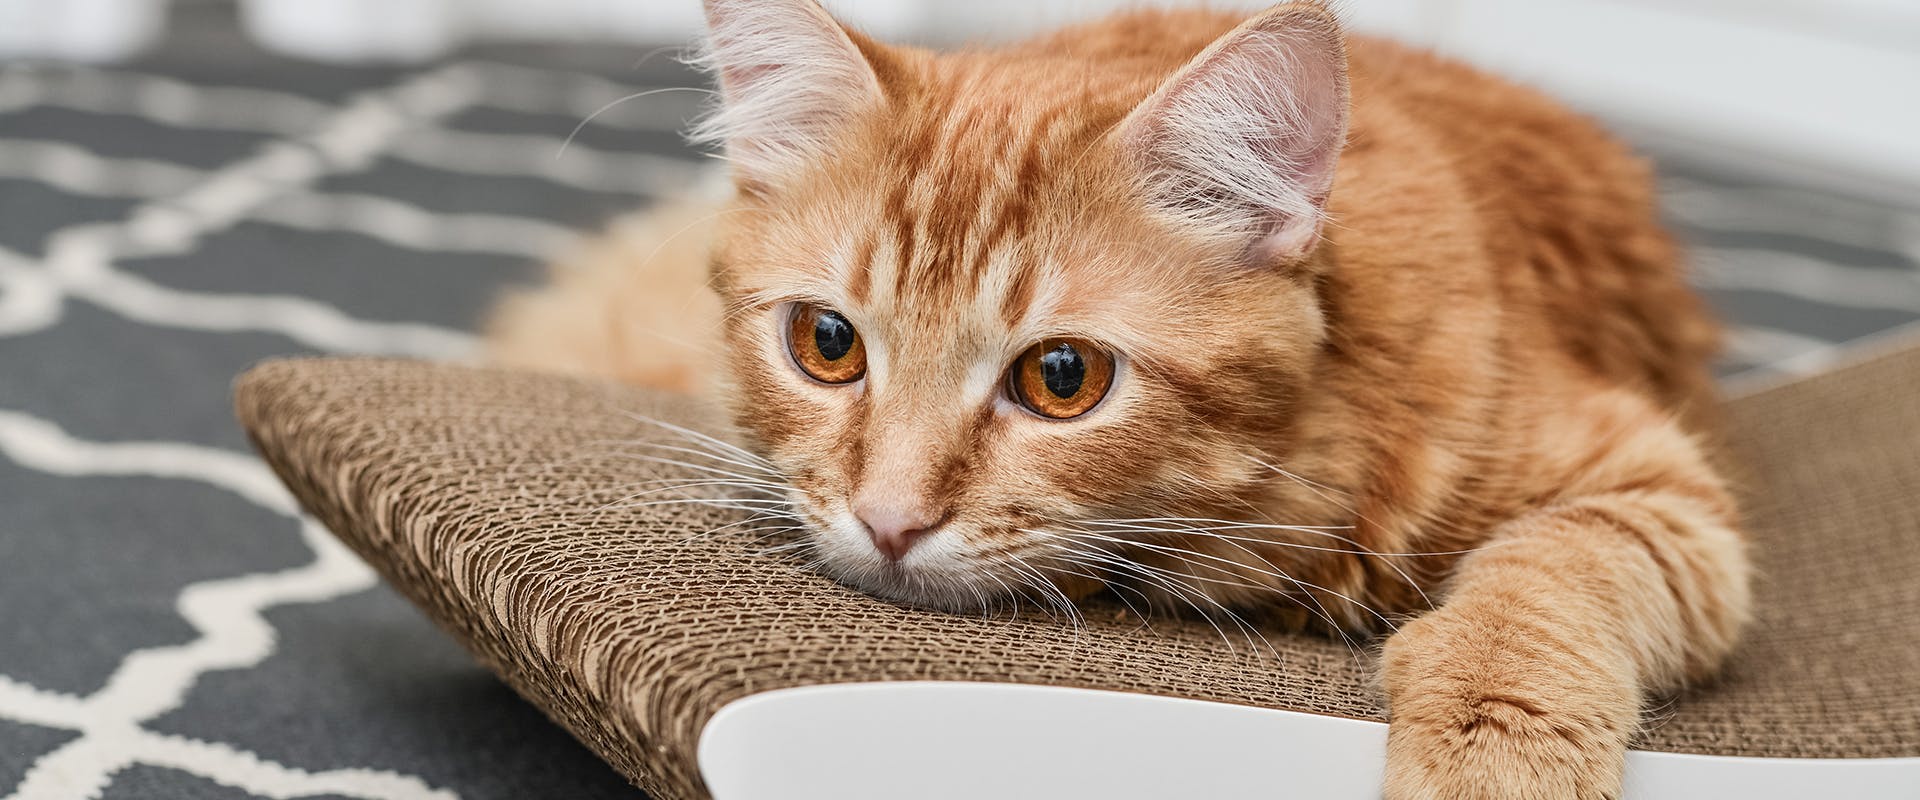 Popular cat names - a cute ginger kitten sitting on top of a scratching board